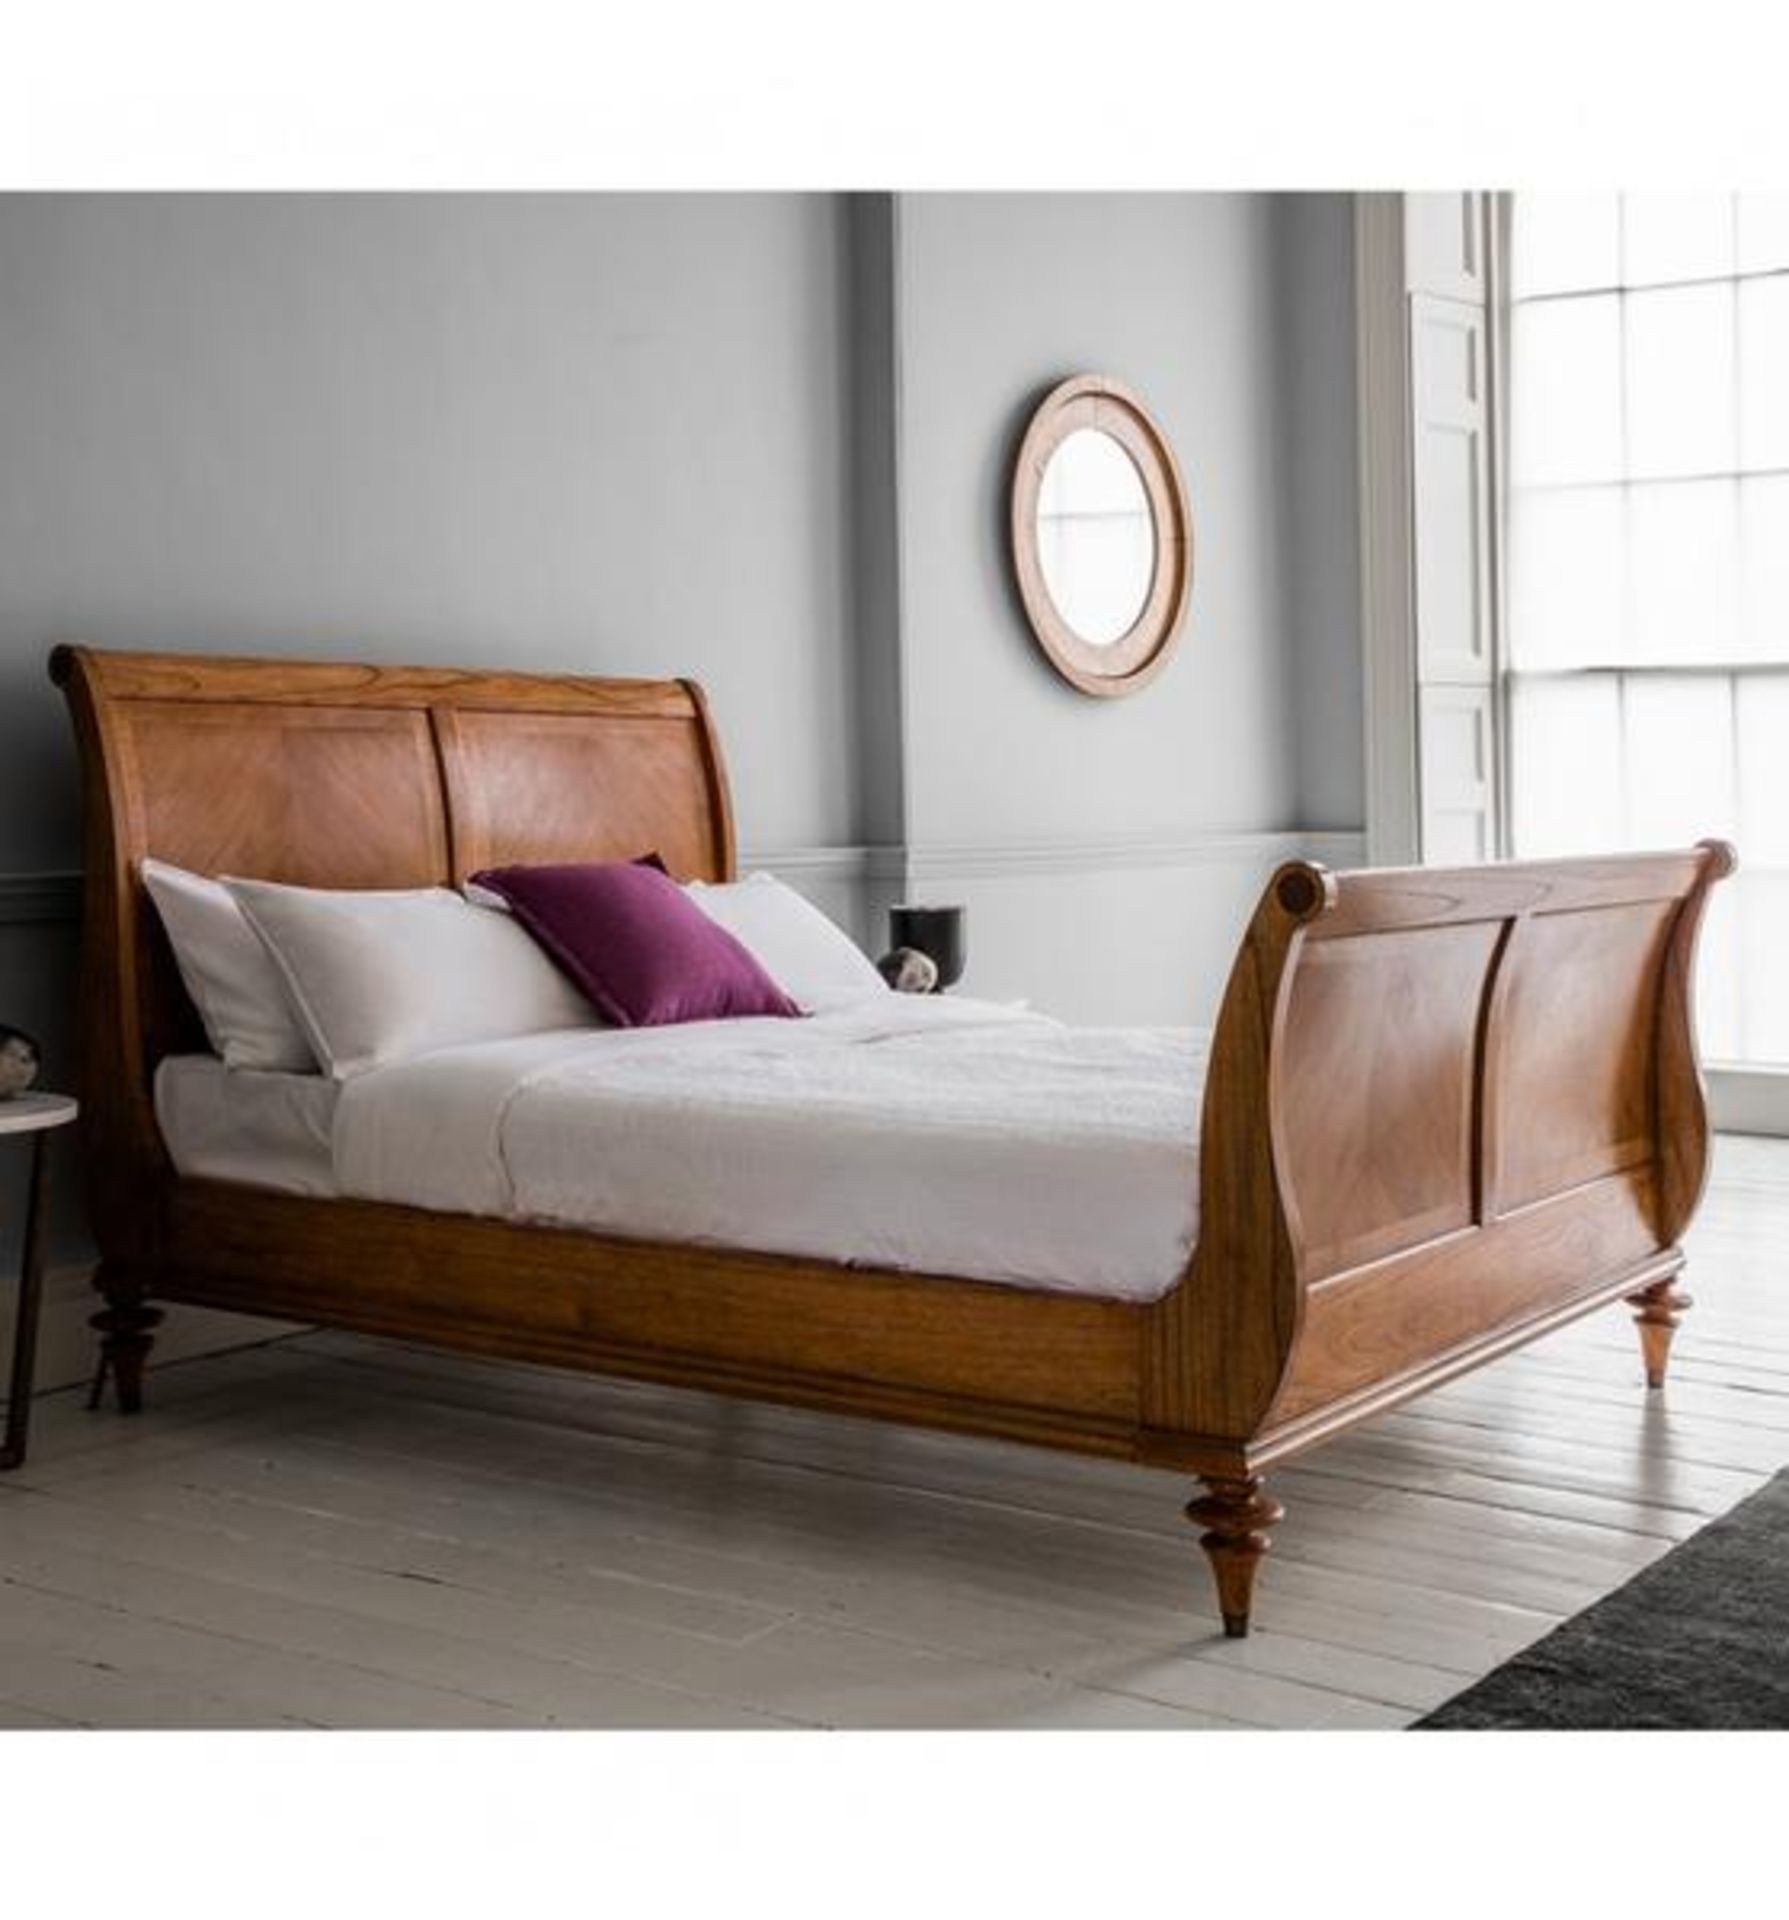 Spire 5' High End Sleigh Bed Spire is a traditional hand made range with lots of fine details - Bild 2 aus 2